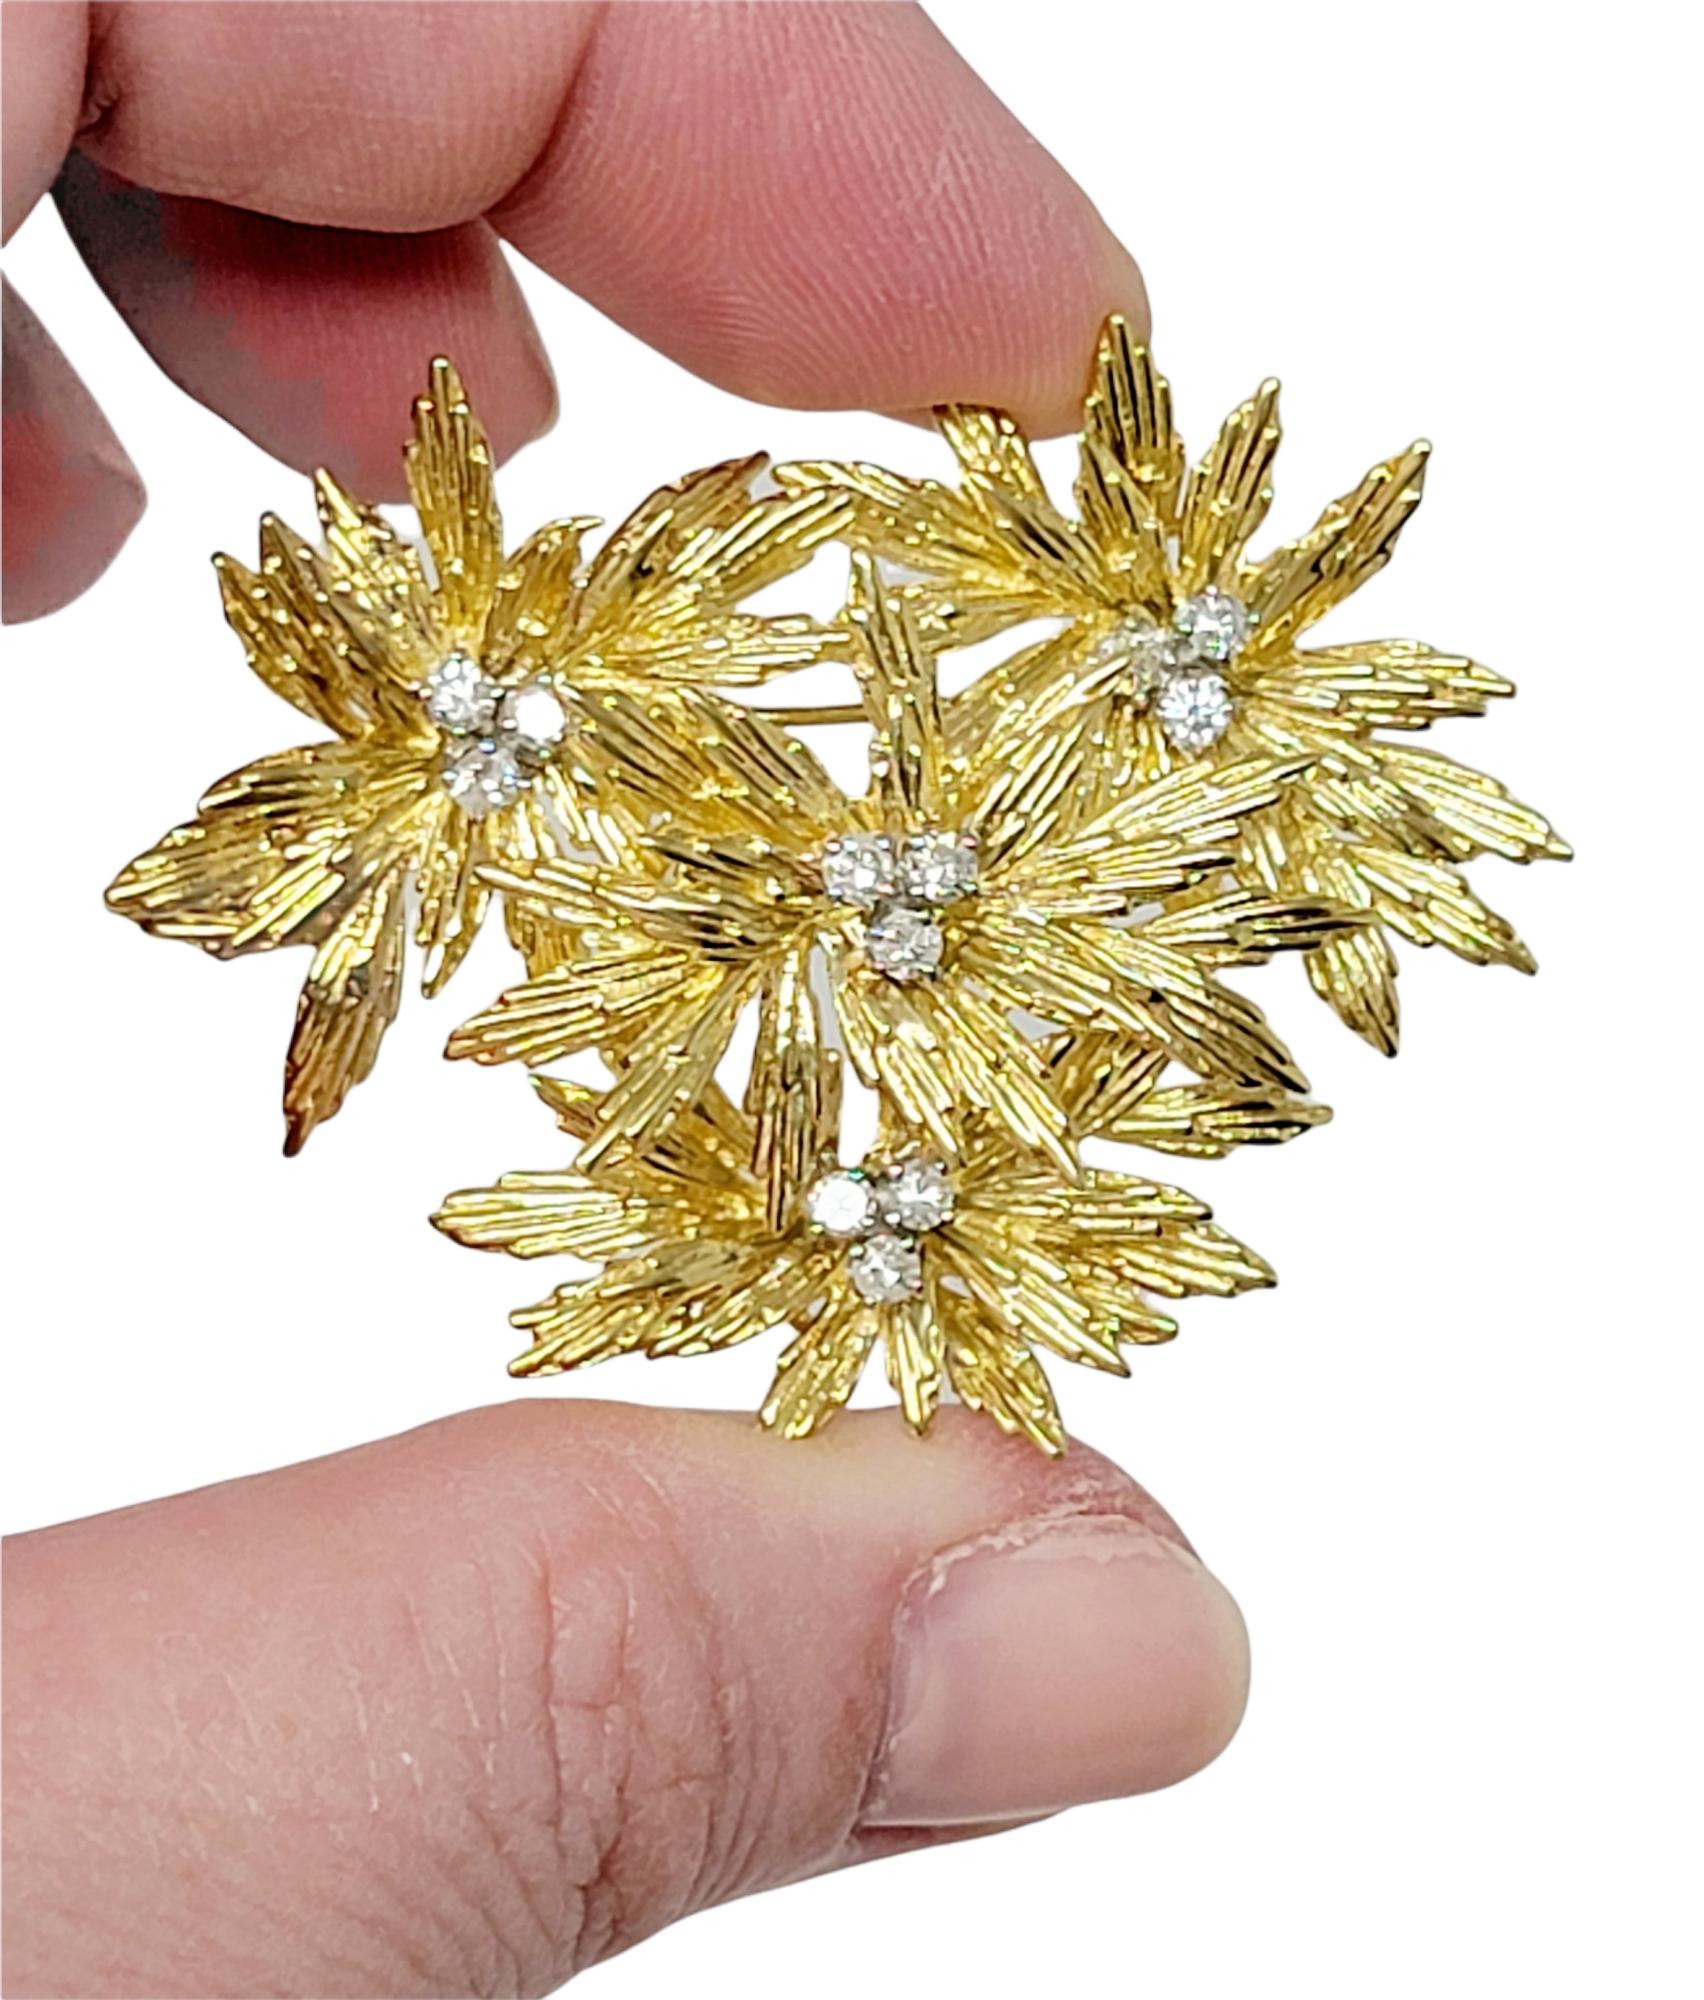 18 Karat Yellow Gold Layered Flowers Brooch with Round Diamond Accents In Good Condition For Sale In Scottsdale, AZ